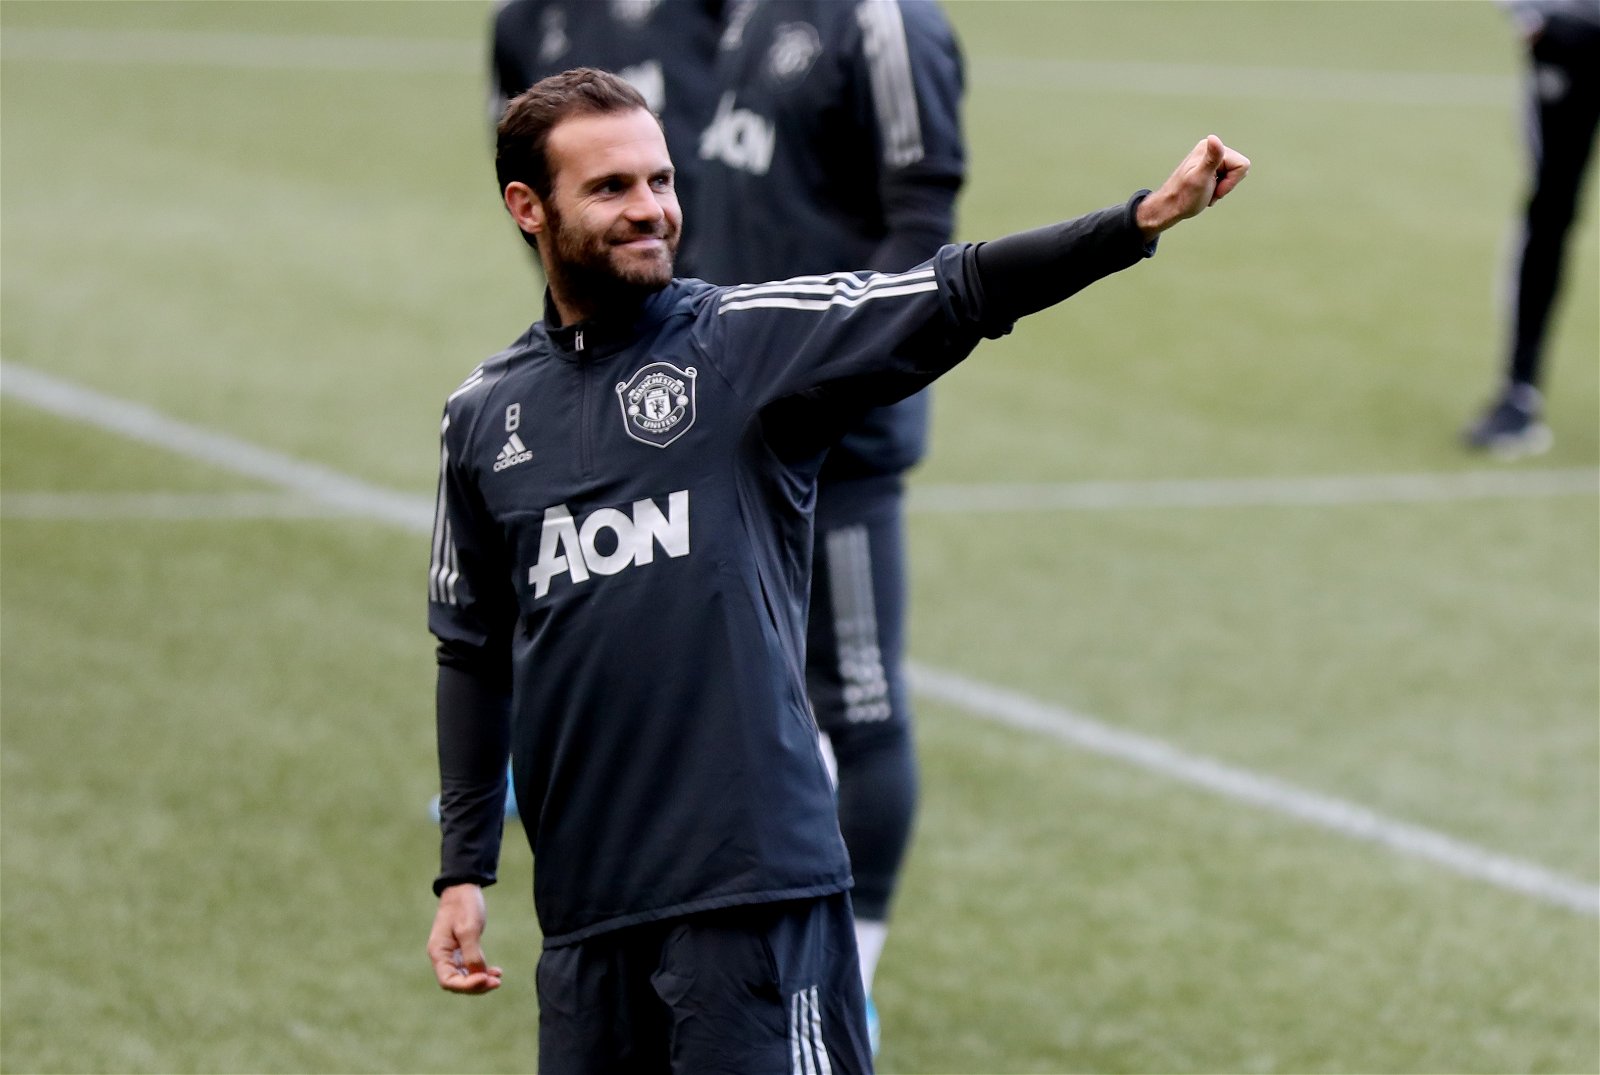 Juan Mata set to leave Manchester United to join struggling AC Milan side